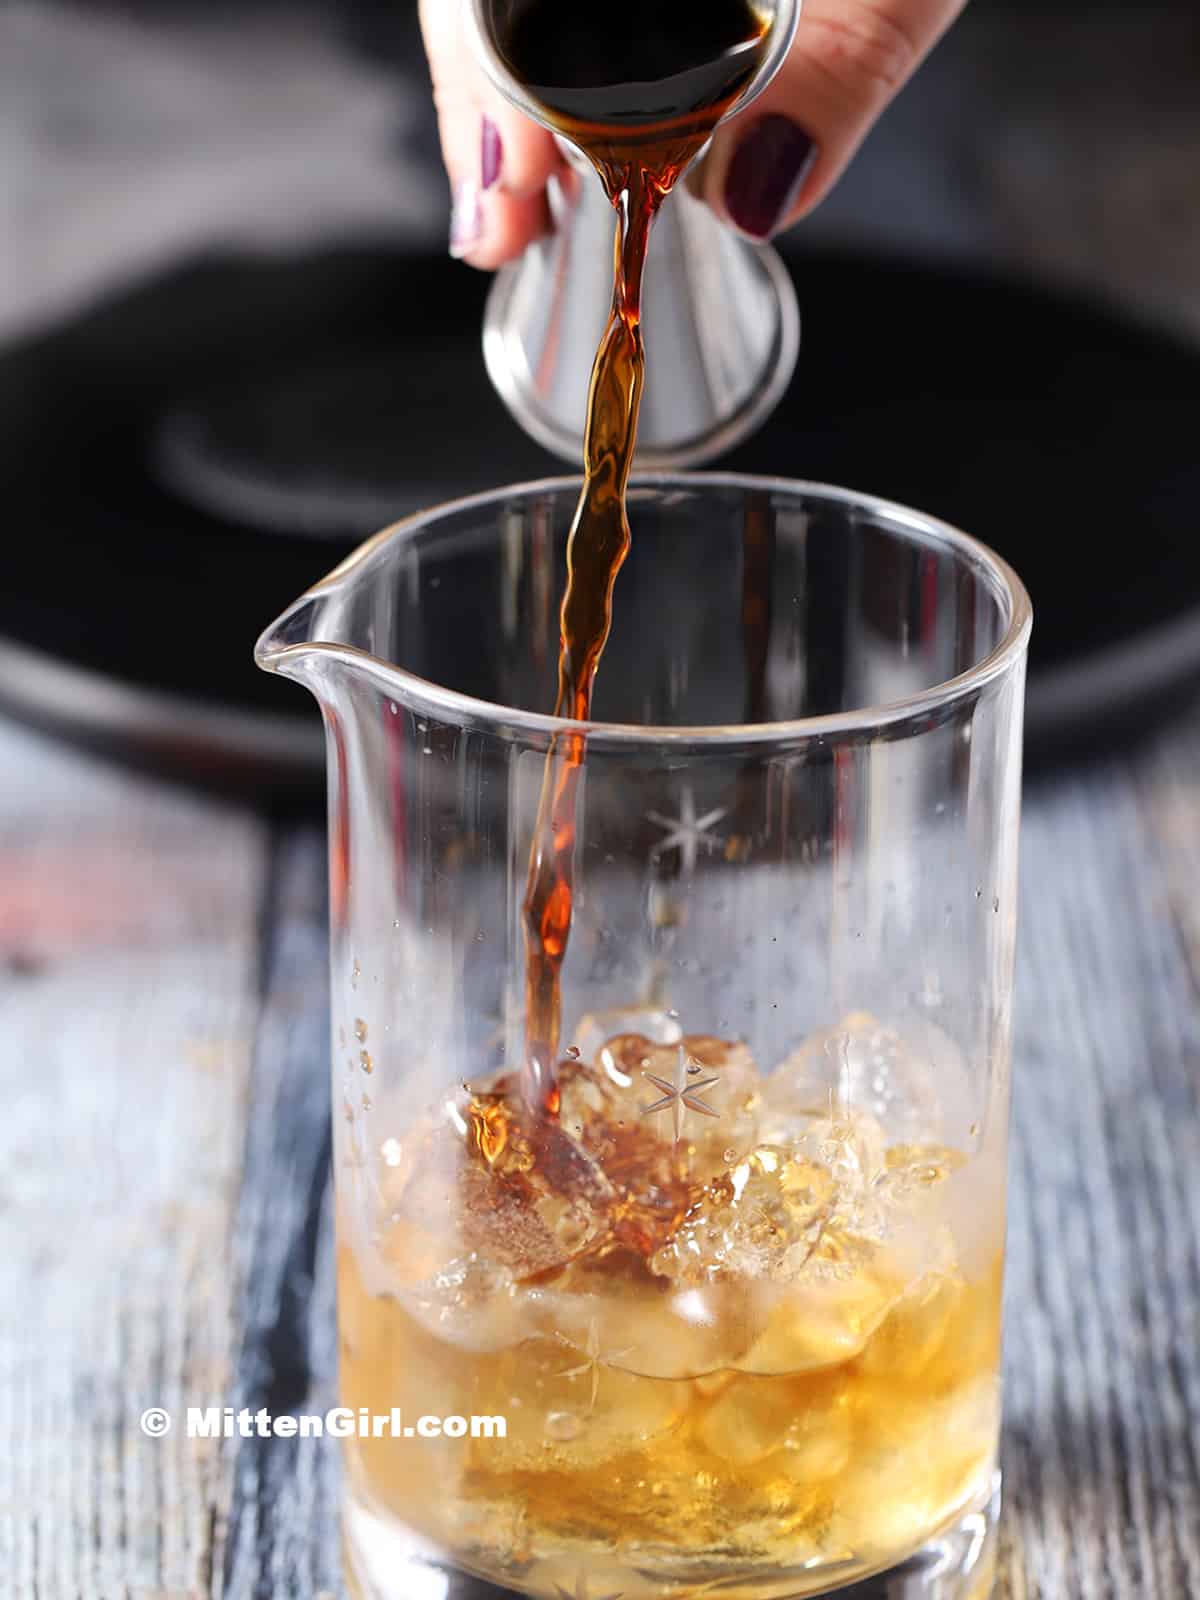 Coffee being poured into a mixing glass filled with bourbon and ice.